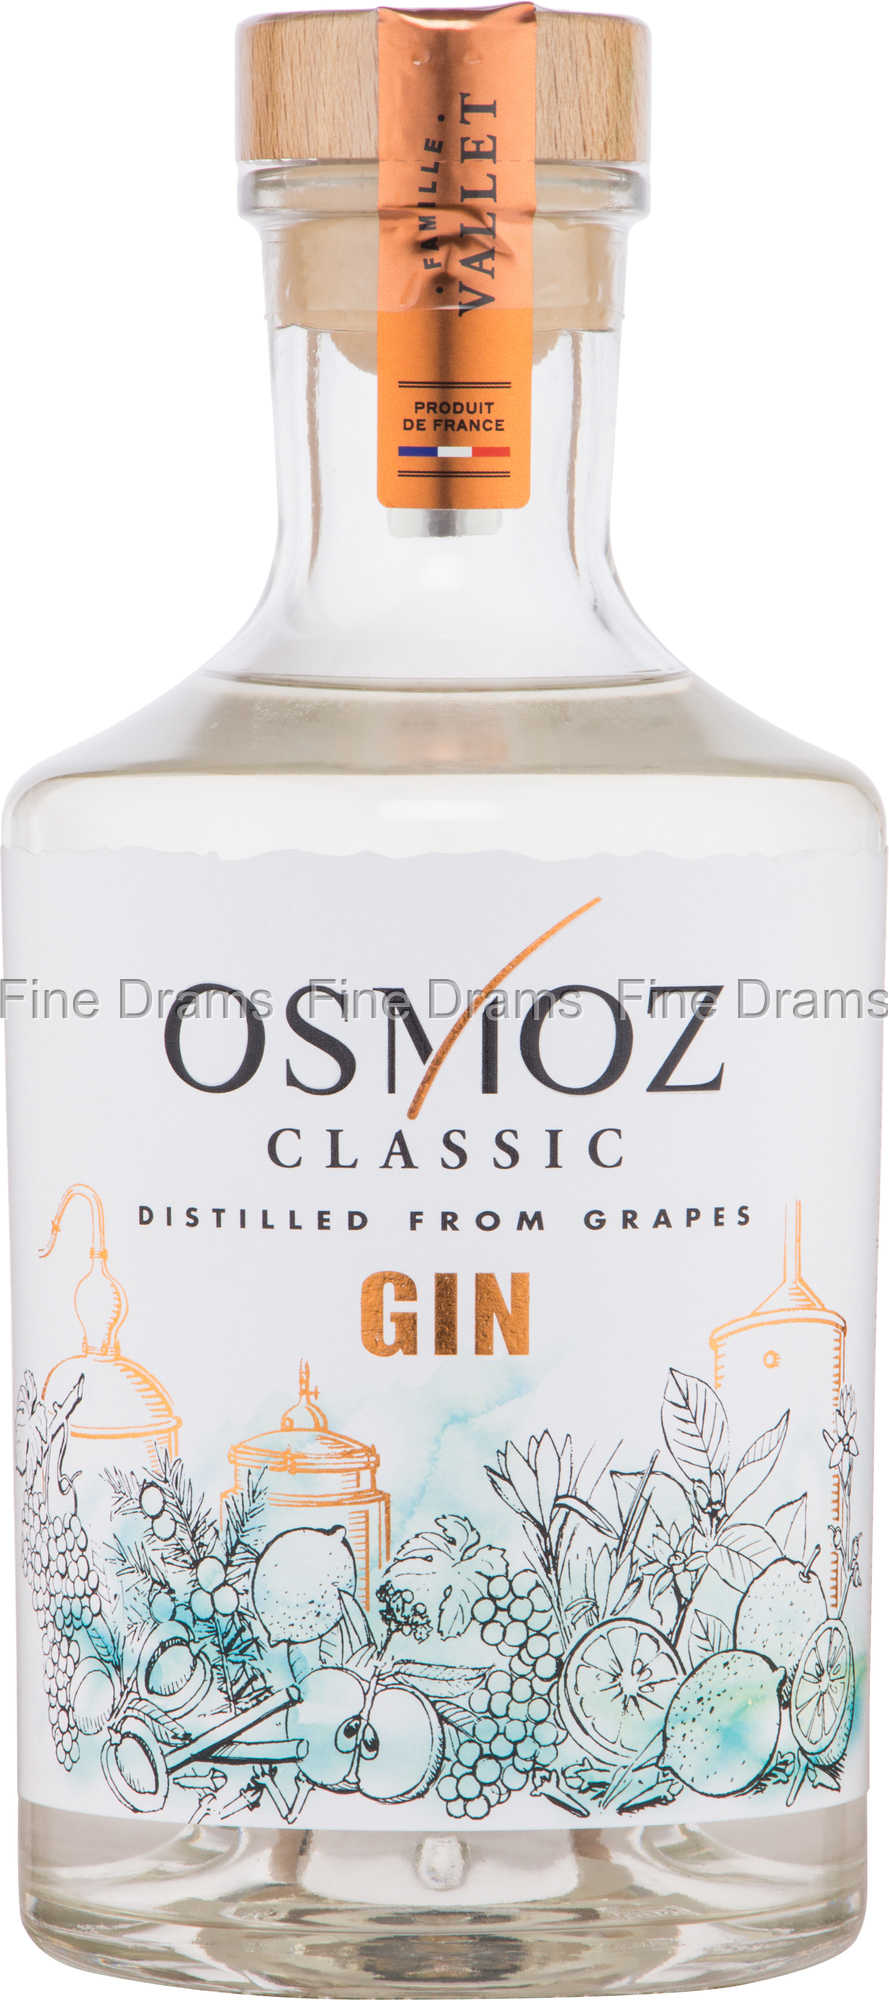 Osmoz - Gin Reviews, Where to Buy & More - Gin Observer